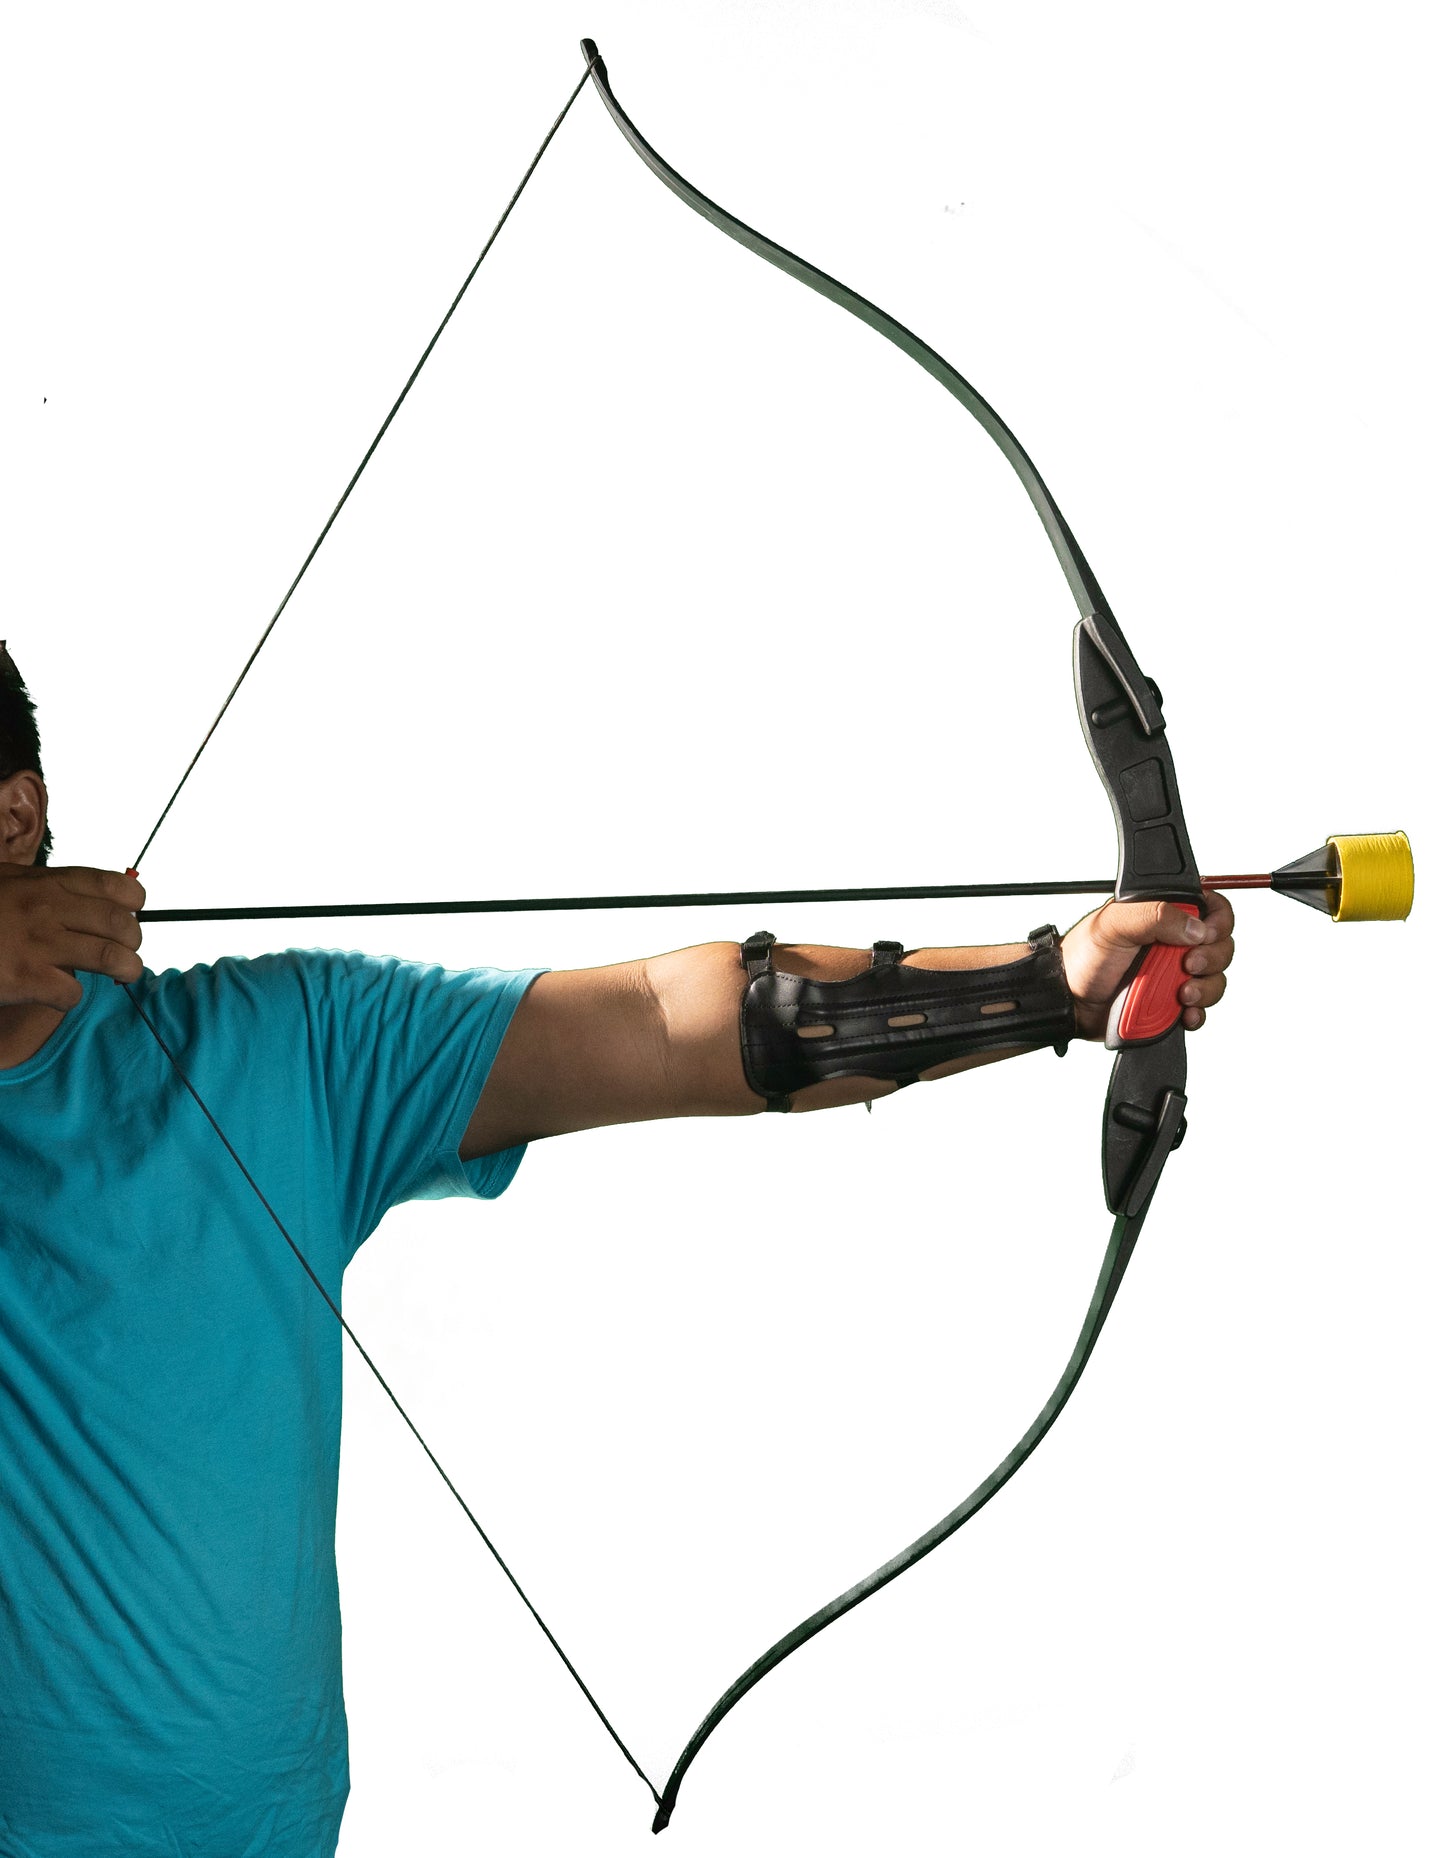 Adult Bow(22lbs) + Arm Guard Combo